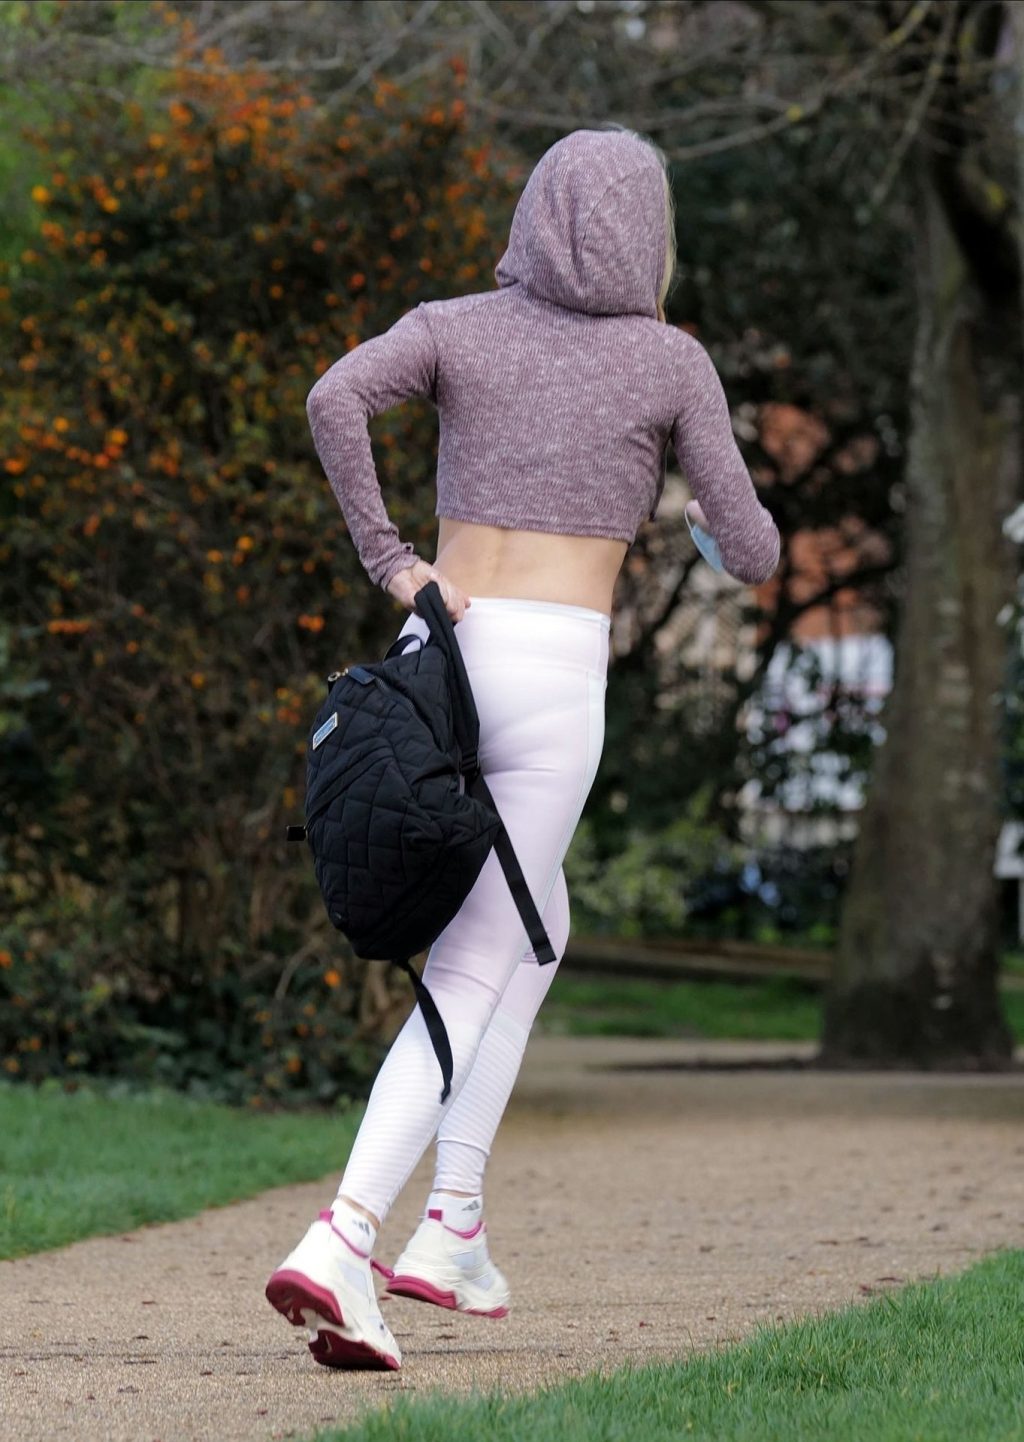 Caprice Takes a Serene Approach by Practicing the Art of Yoga in a London park (10 Photos)